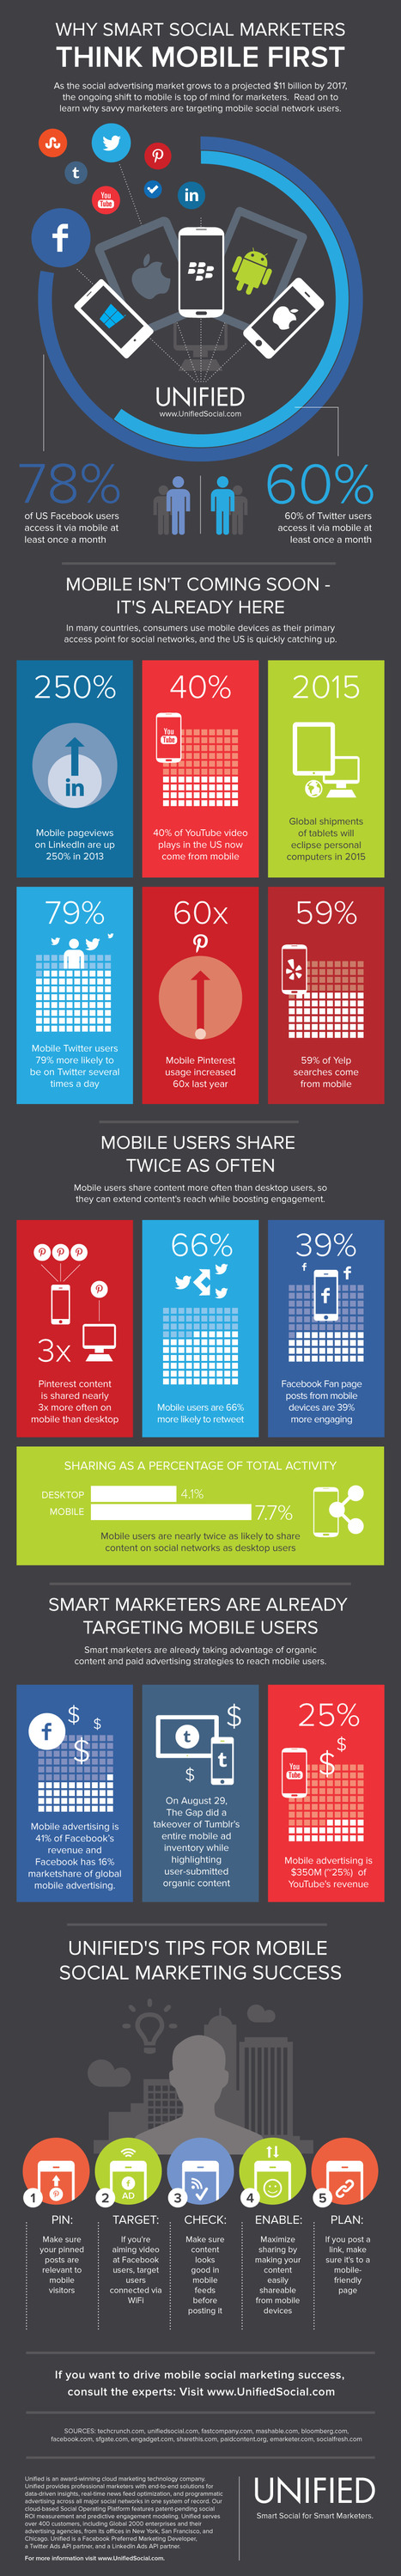 Why Smart Social Marketers Think Mobile First | Online tips & social media nieuws | Scoop.it